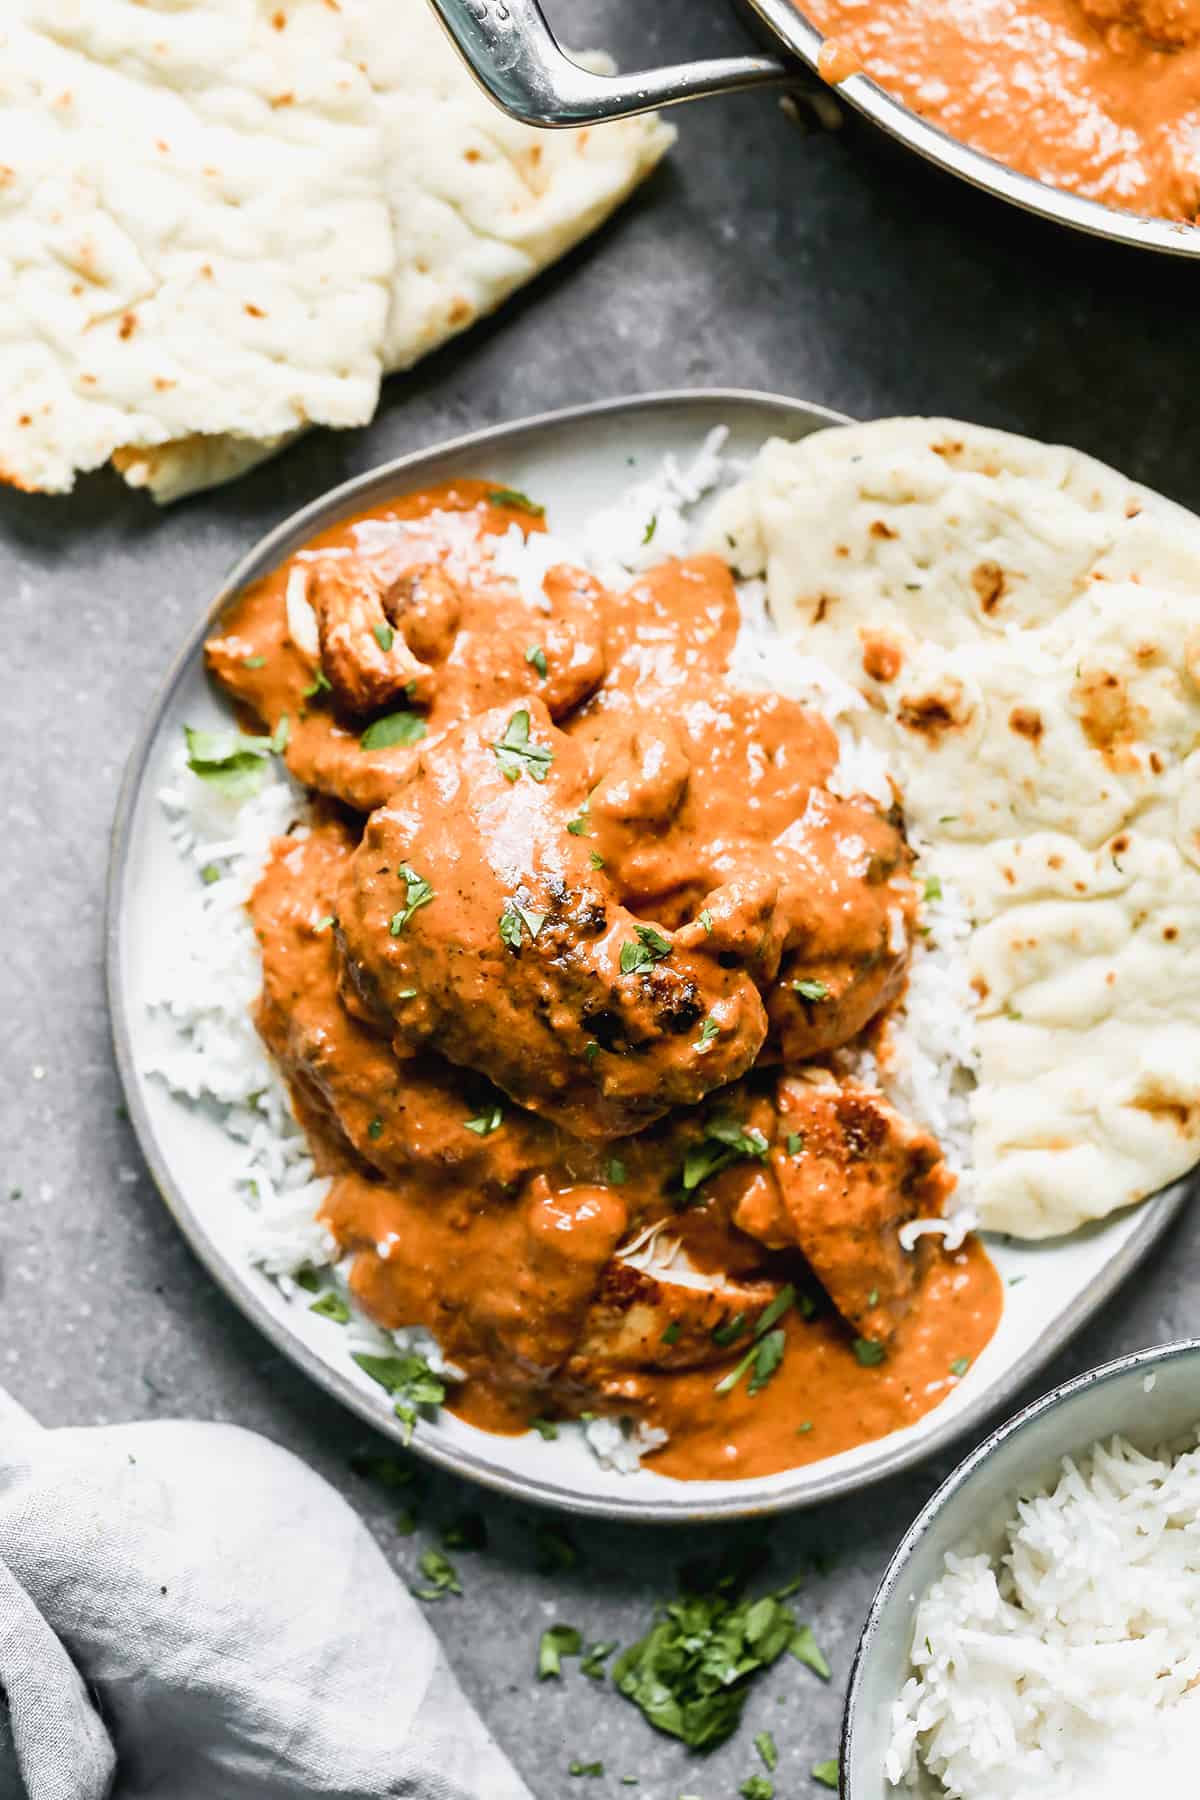 Chicken Tikka Masala on a bed of rice with naan next to it, ready to enjoy.